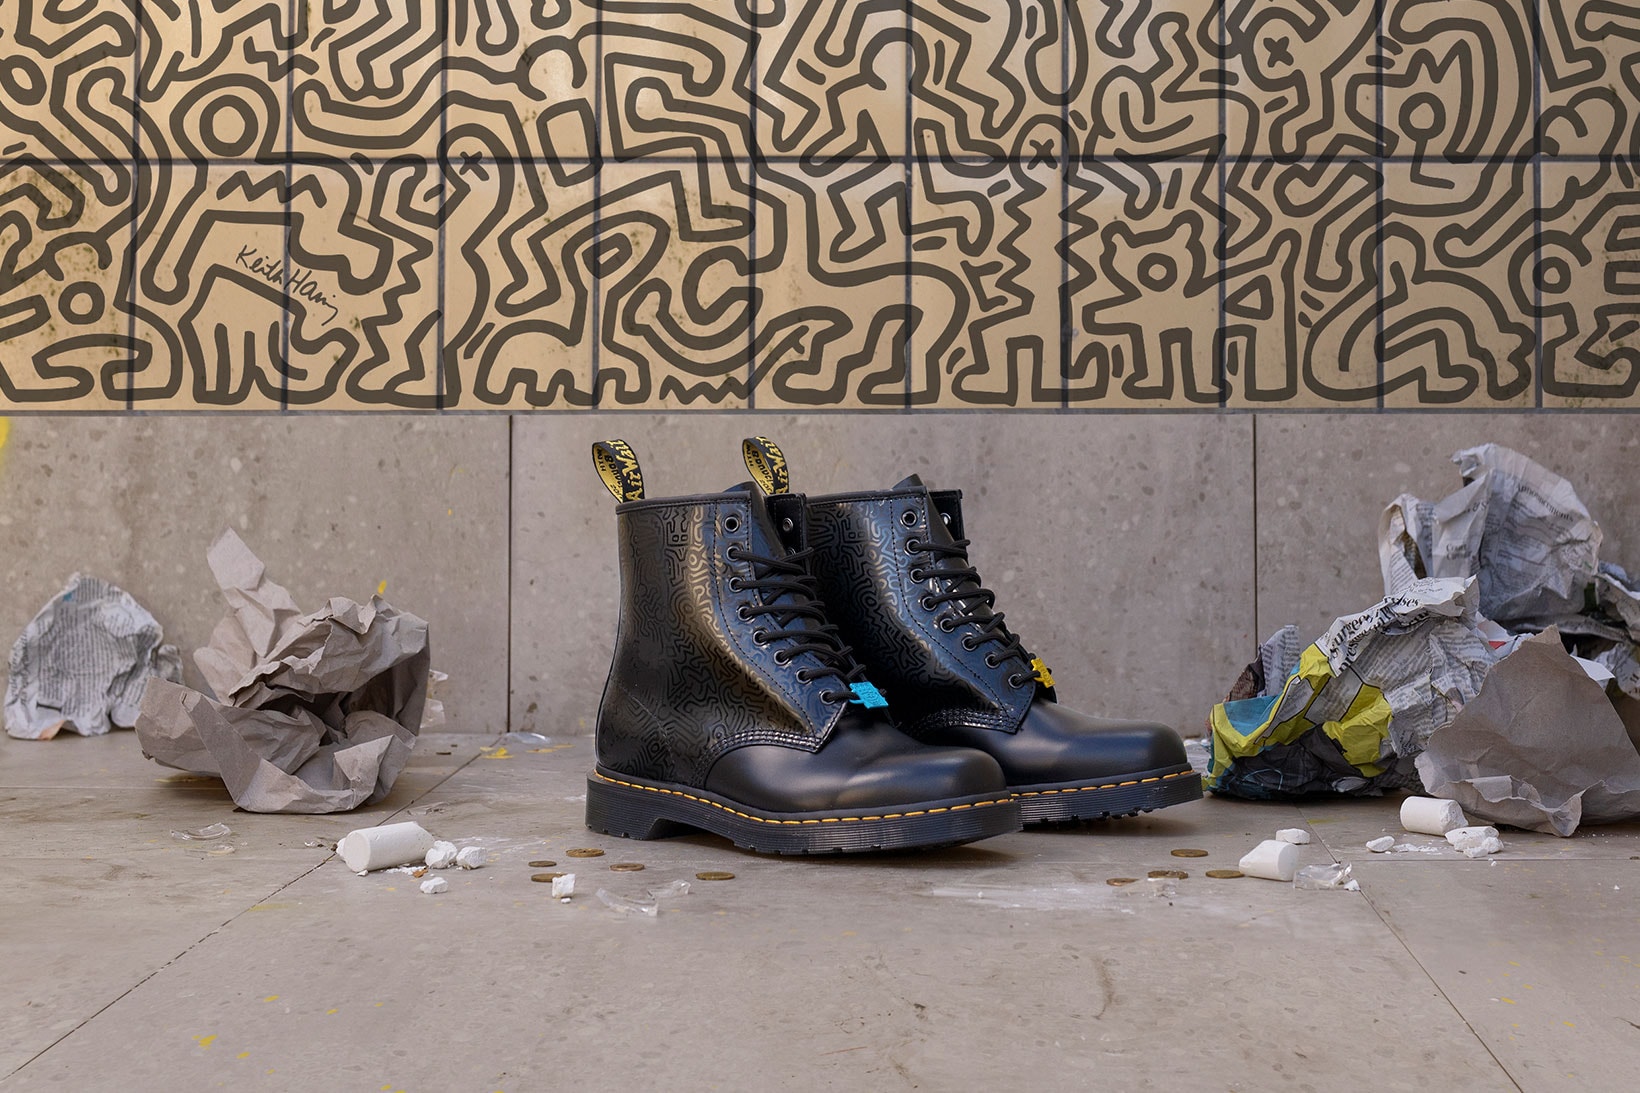 Dr. Martens Keith Haring Collaboration Boots Shoes 1460 Black Pattern Illustrations Wall Mural NYC